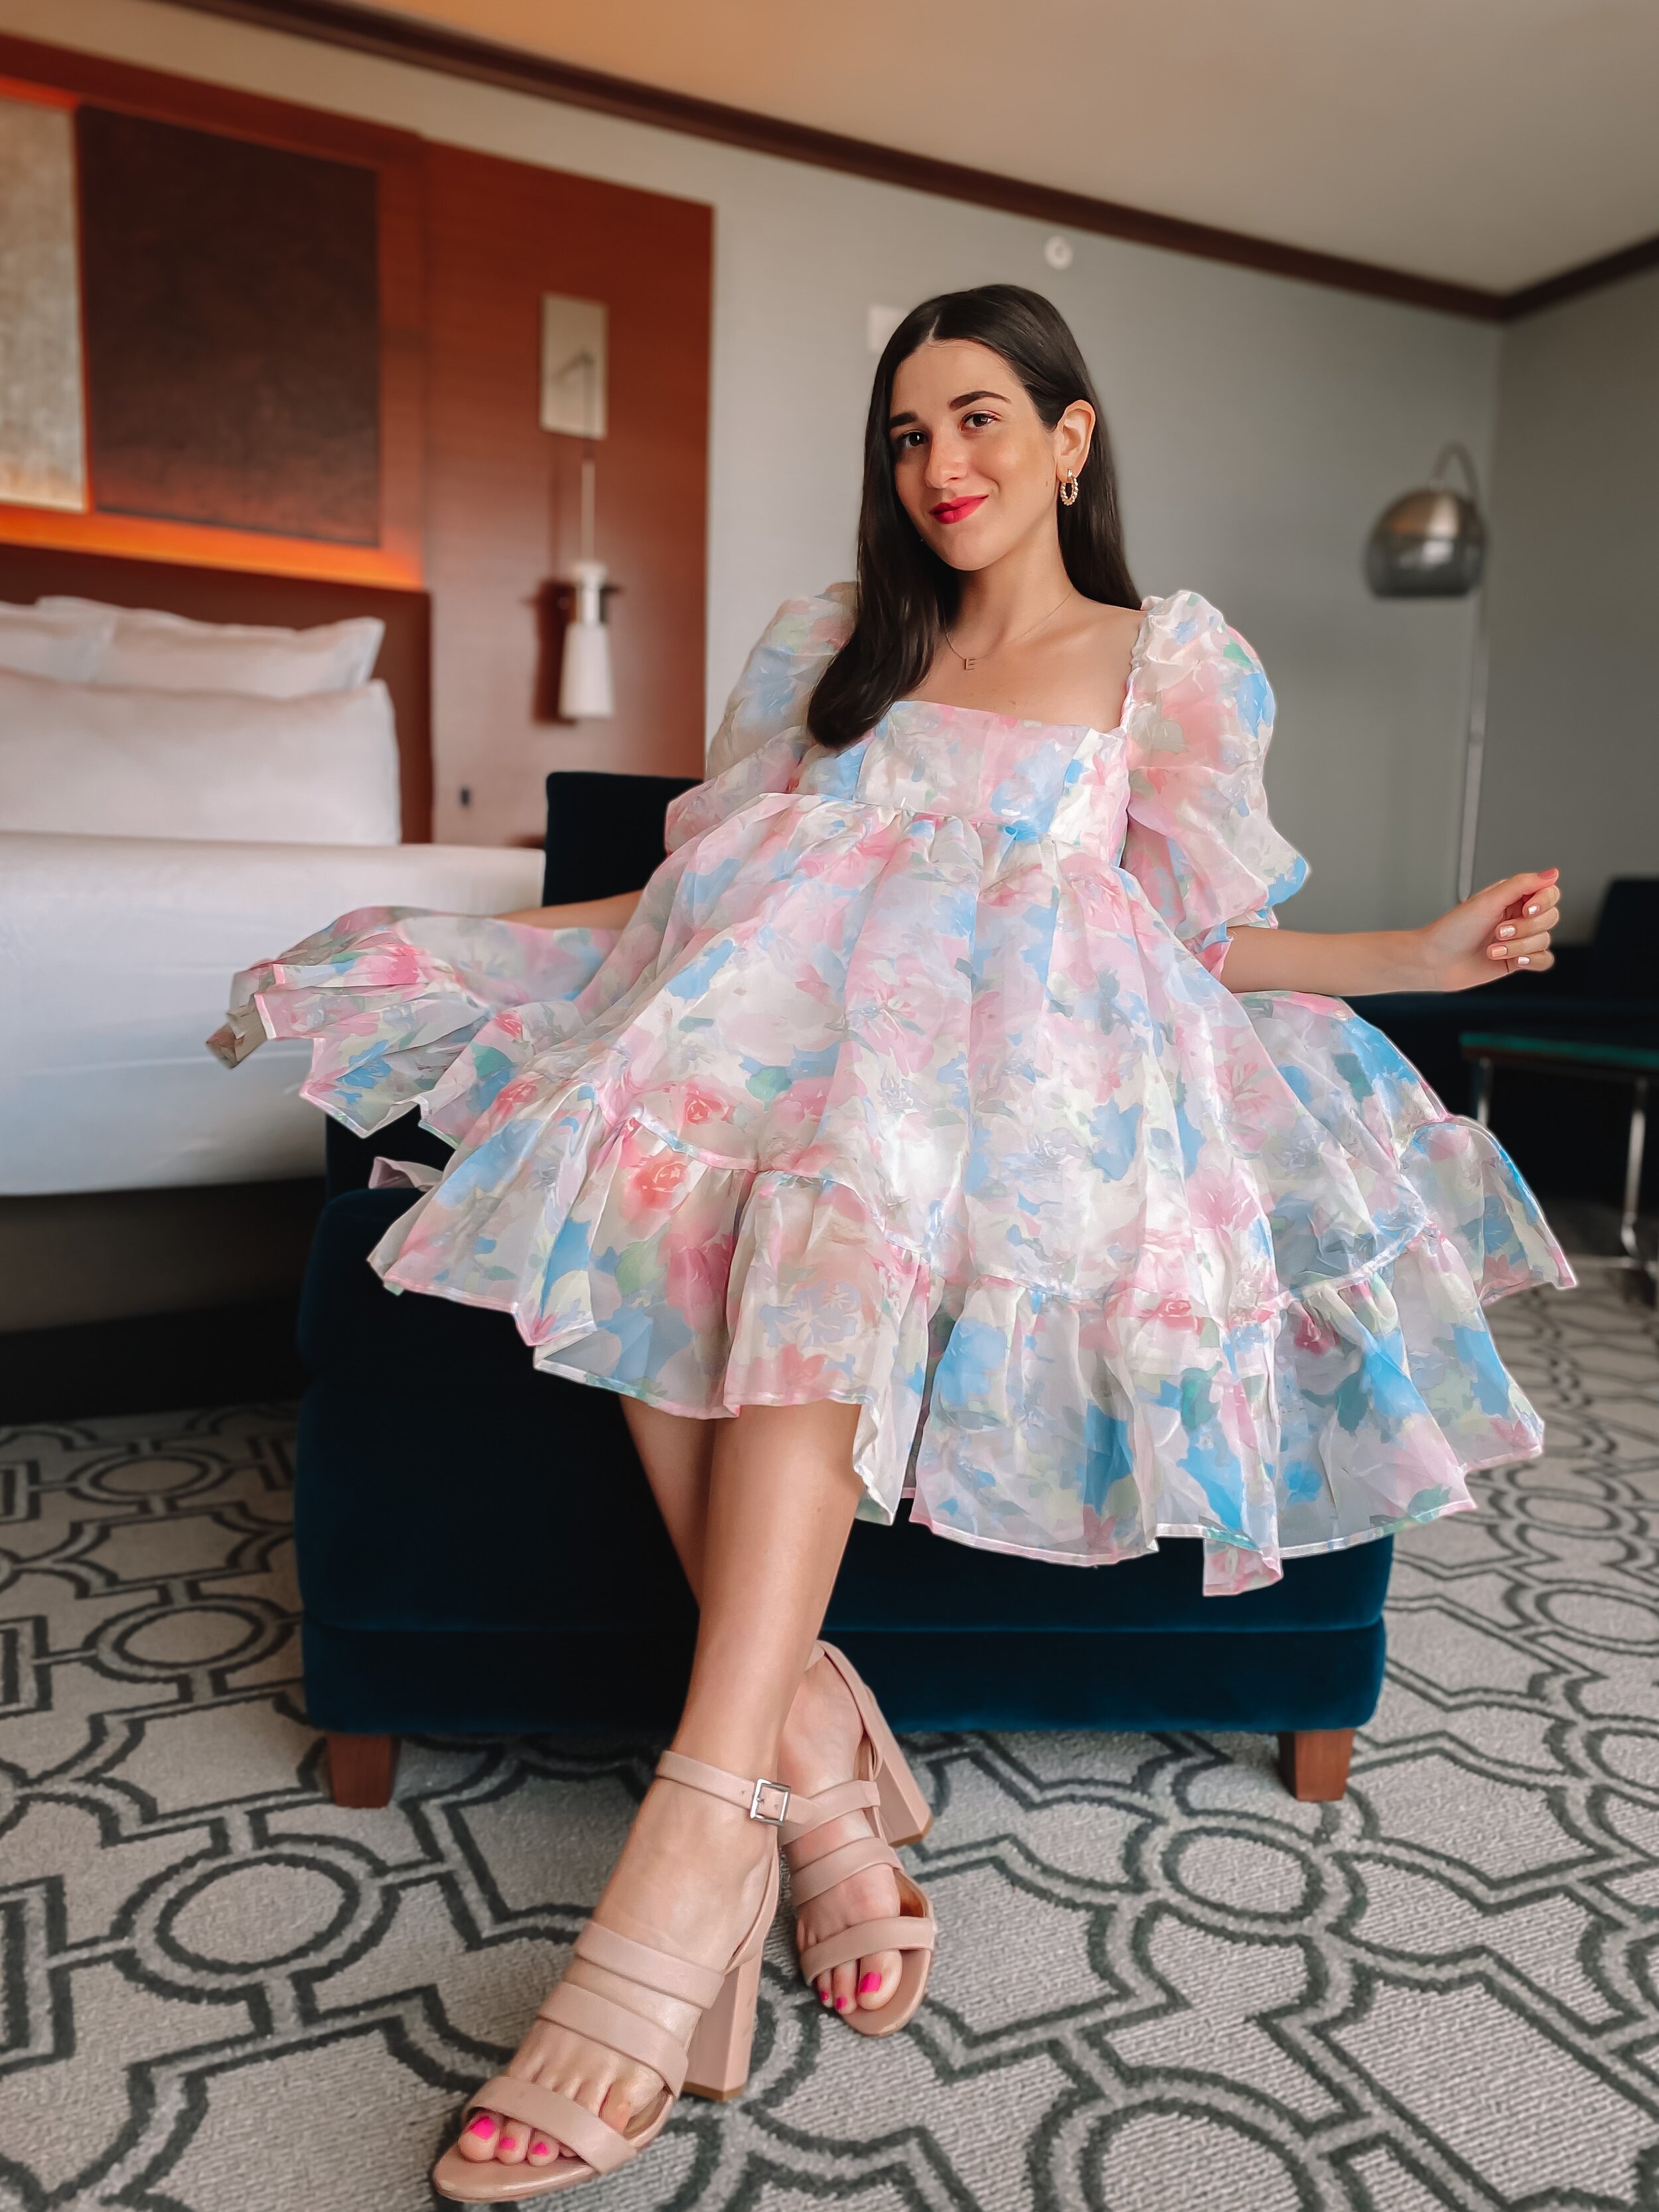 Princess Moment In Upstate New York Esther Santer NYC Street Style Blogger Hotel Puff Floral Dress Pink Heels Pastel Goodnight Macaroon Fun Poses Heels Women Girl Resort World Casino Suite Summer Styling What to Wear Fancy  Trendy Shop Pretty.JPG